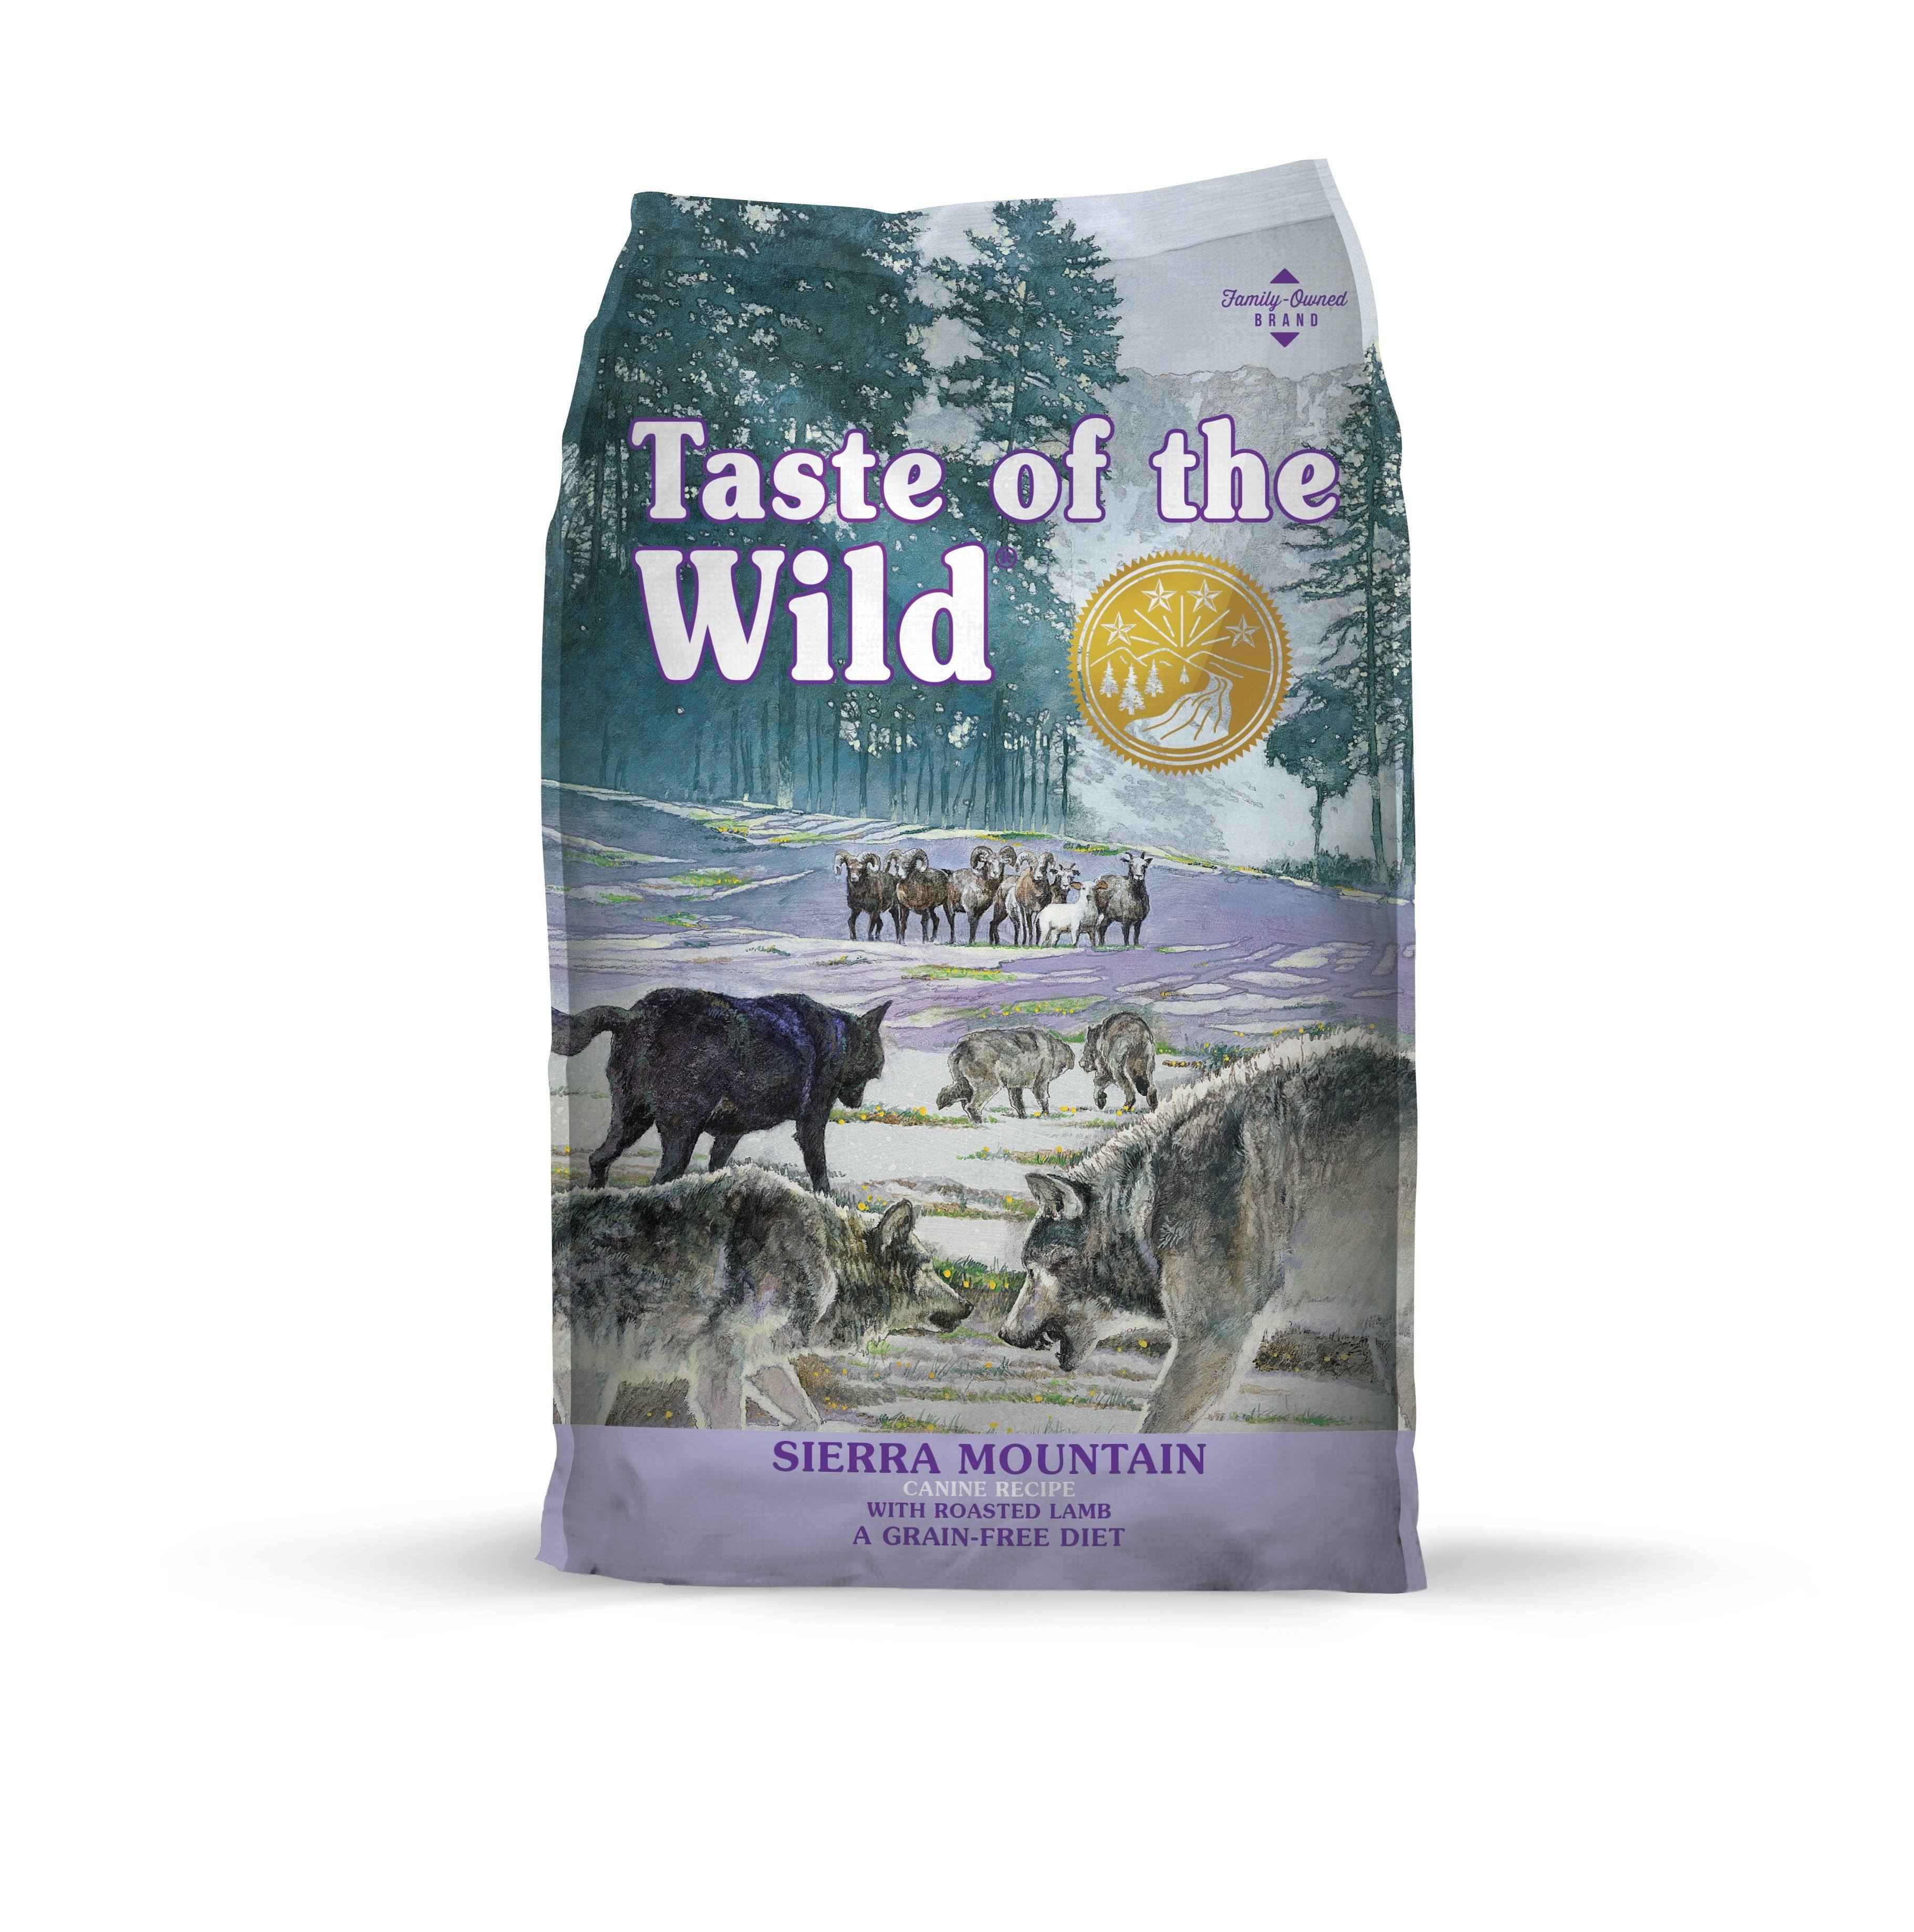 Taste of The Wild Sierra Mountain Grain-Free Canine Recipe with Roasted Lamb Dry Dog Food For All Life Stages, Made with High Protein from Real Lamb A